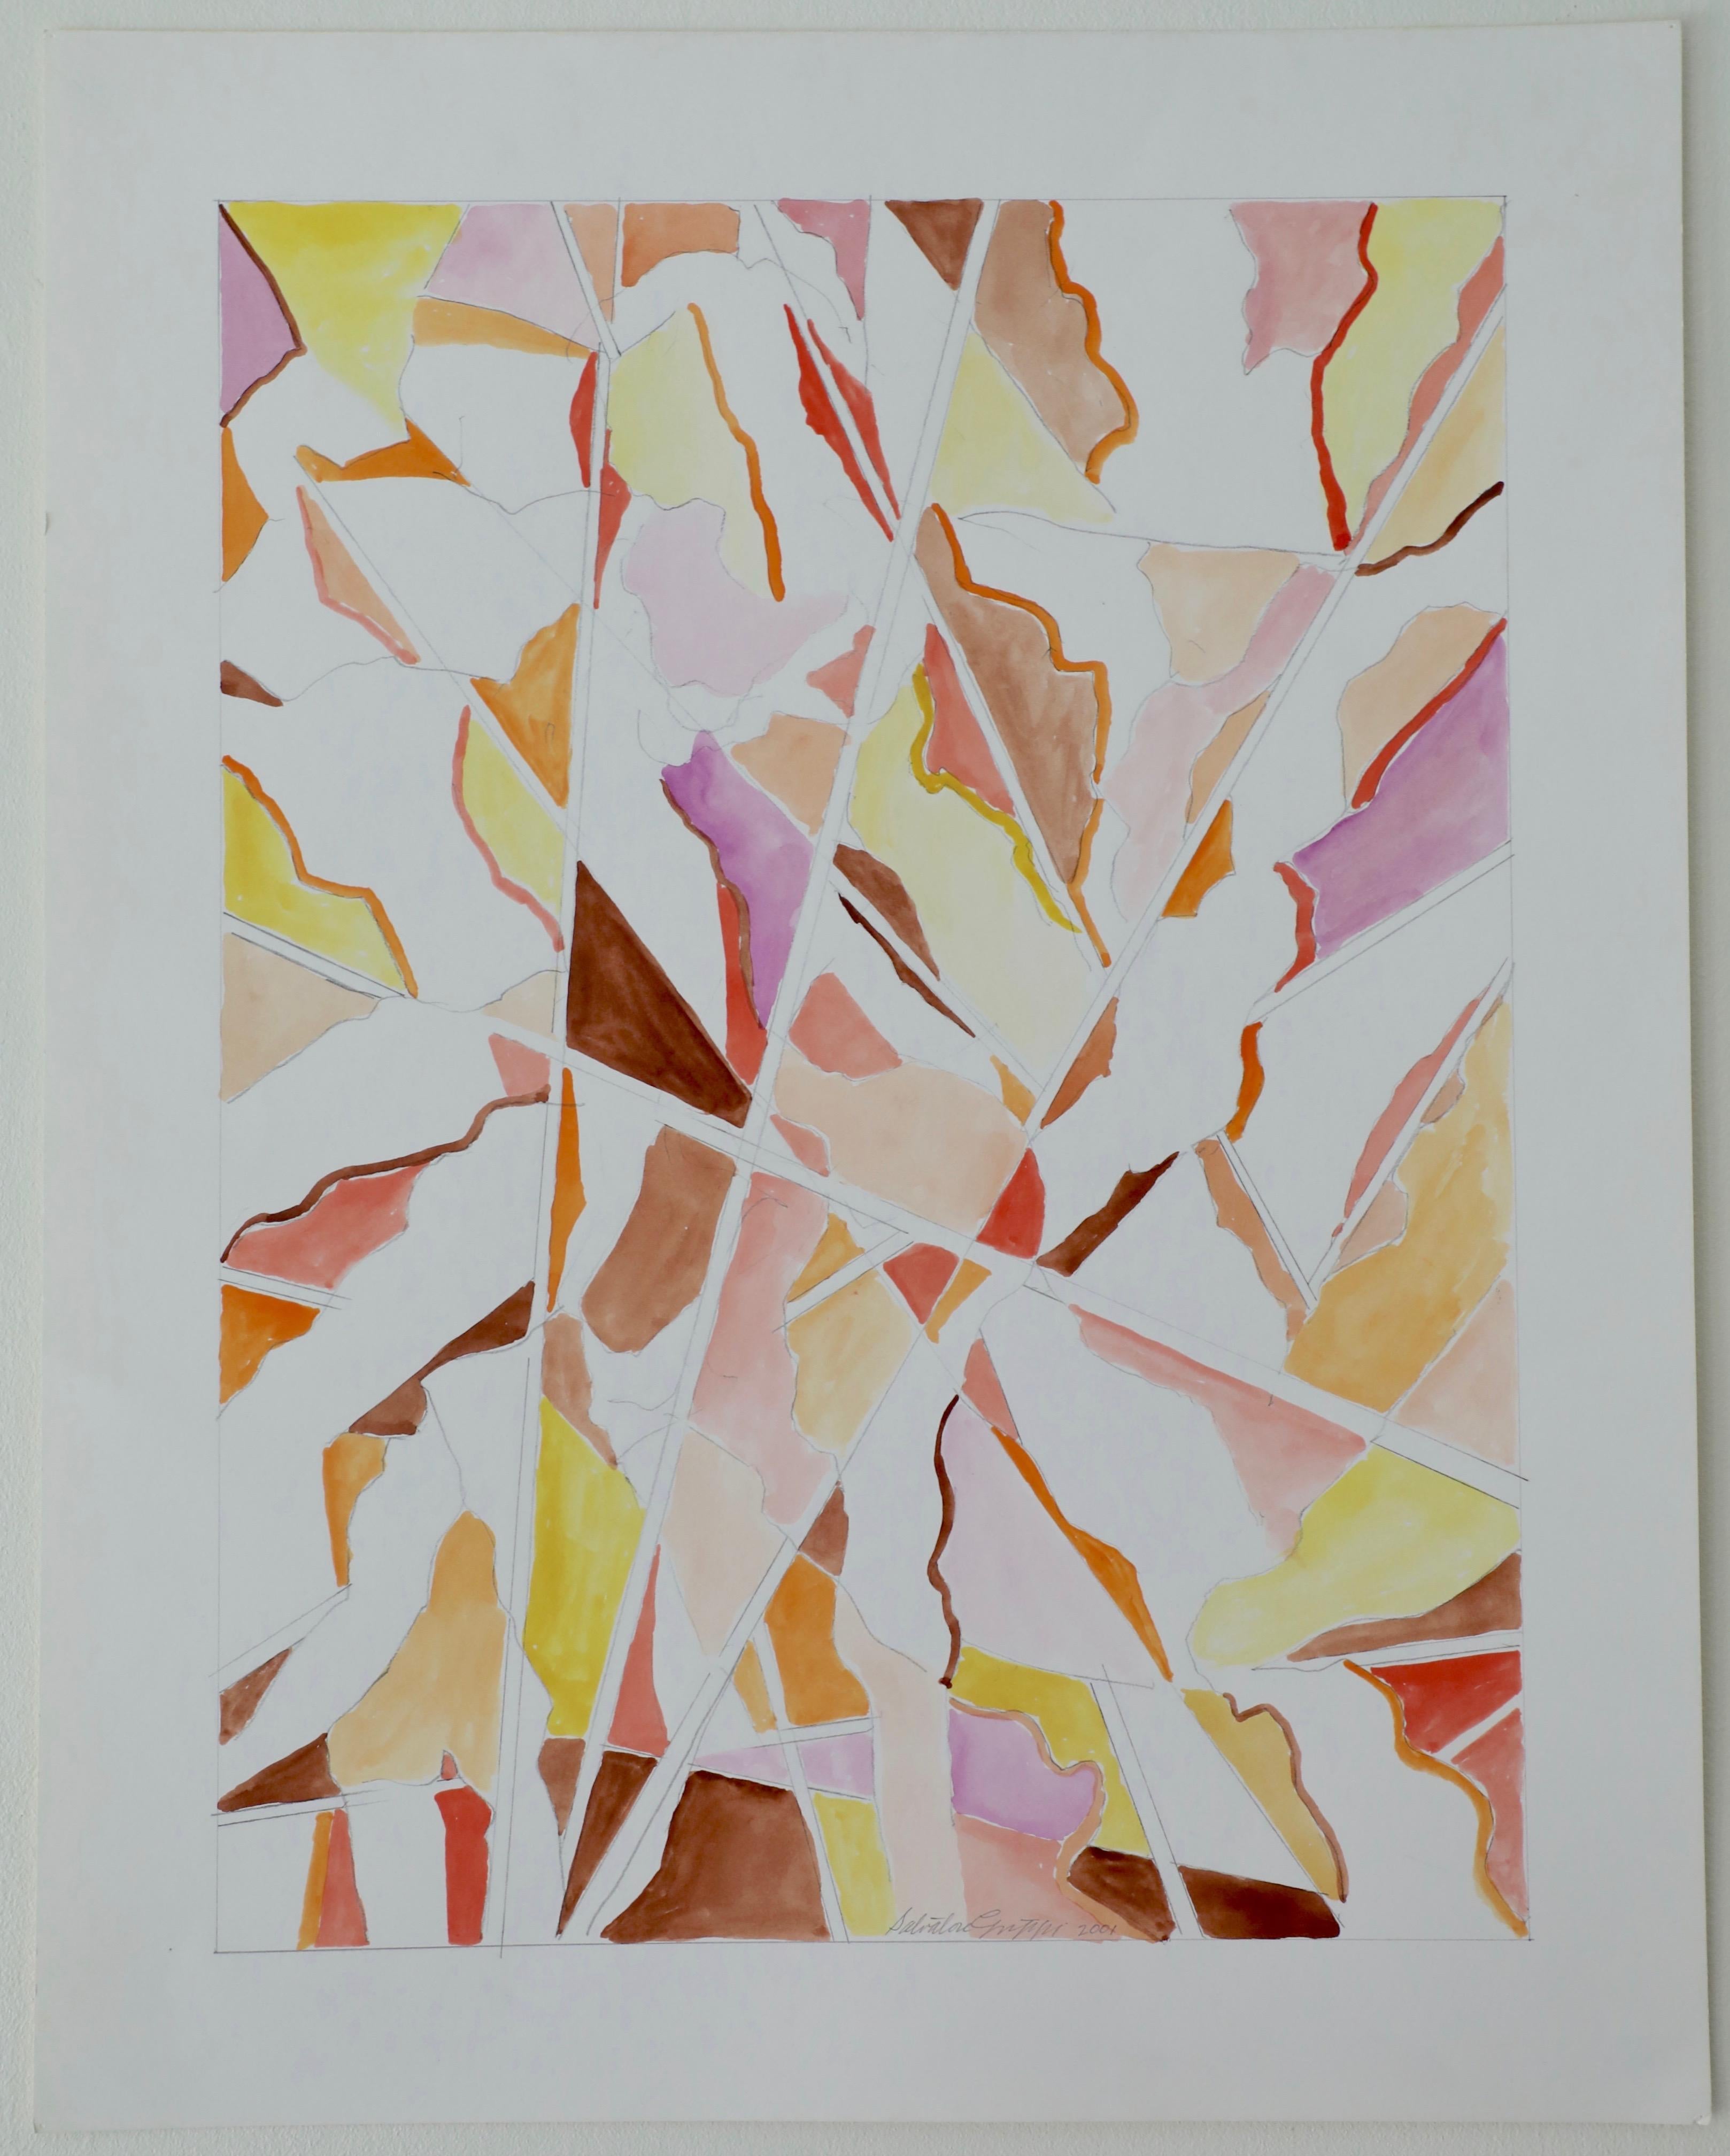 Abstract Geometric Work on Paper - Art by Salvatore Grippi